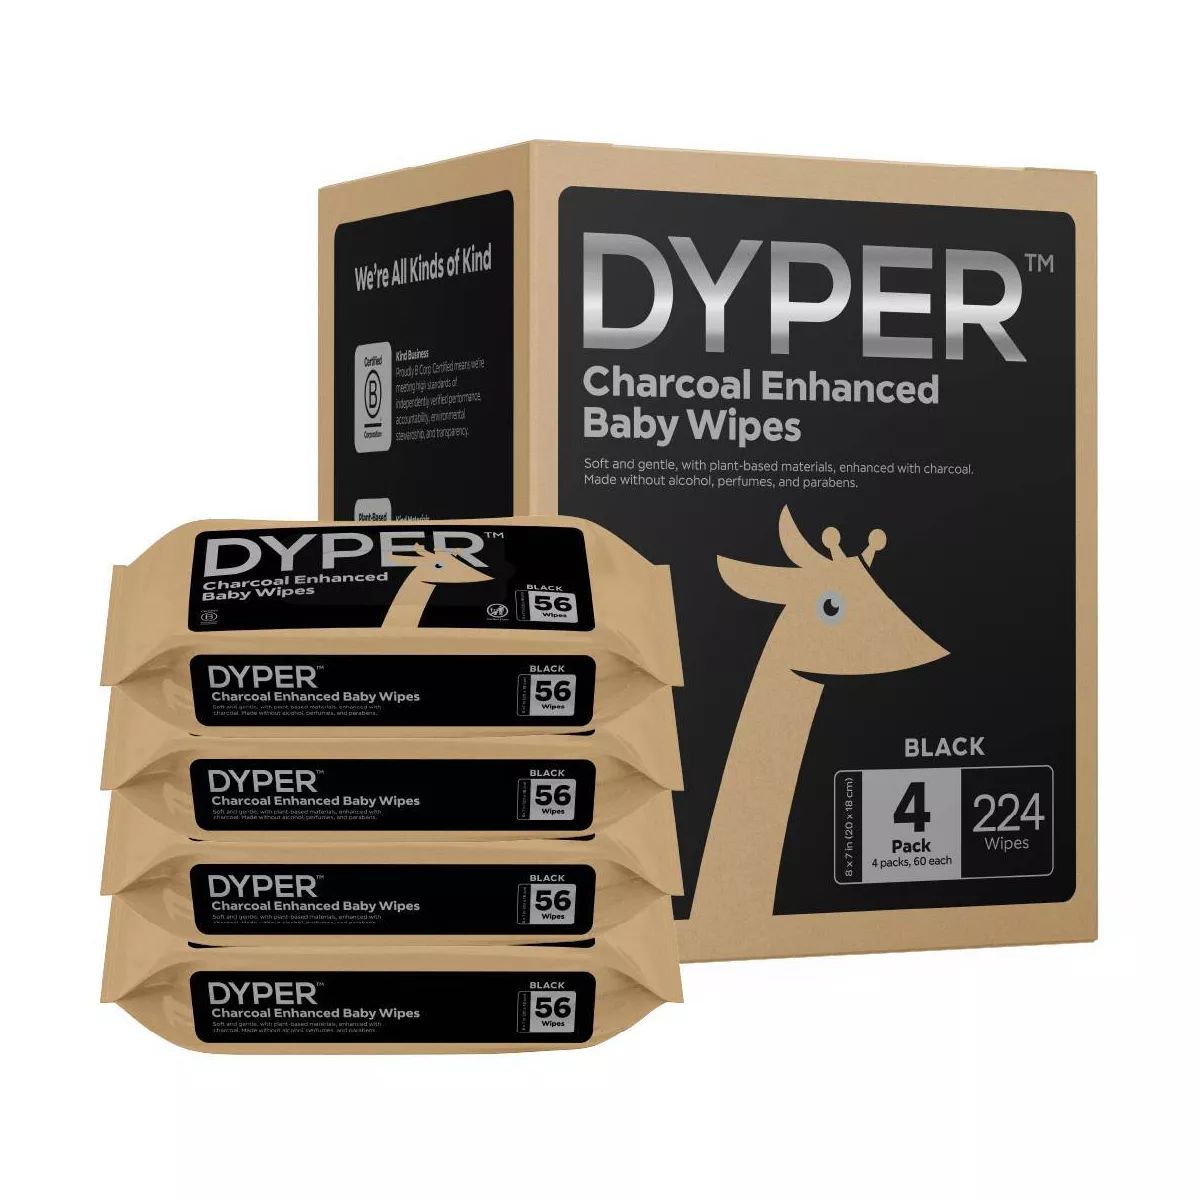 DYPER Charcoal Enhanced Baby Wipes - 224ct | Target